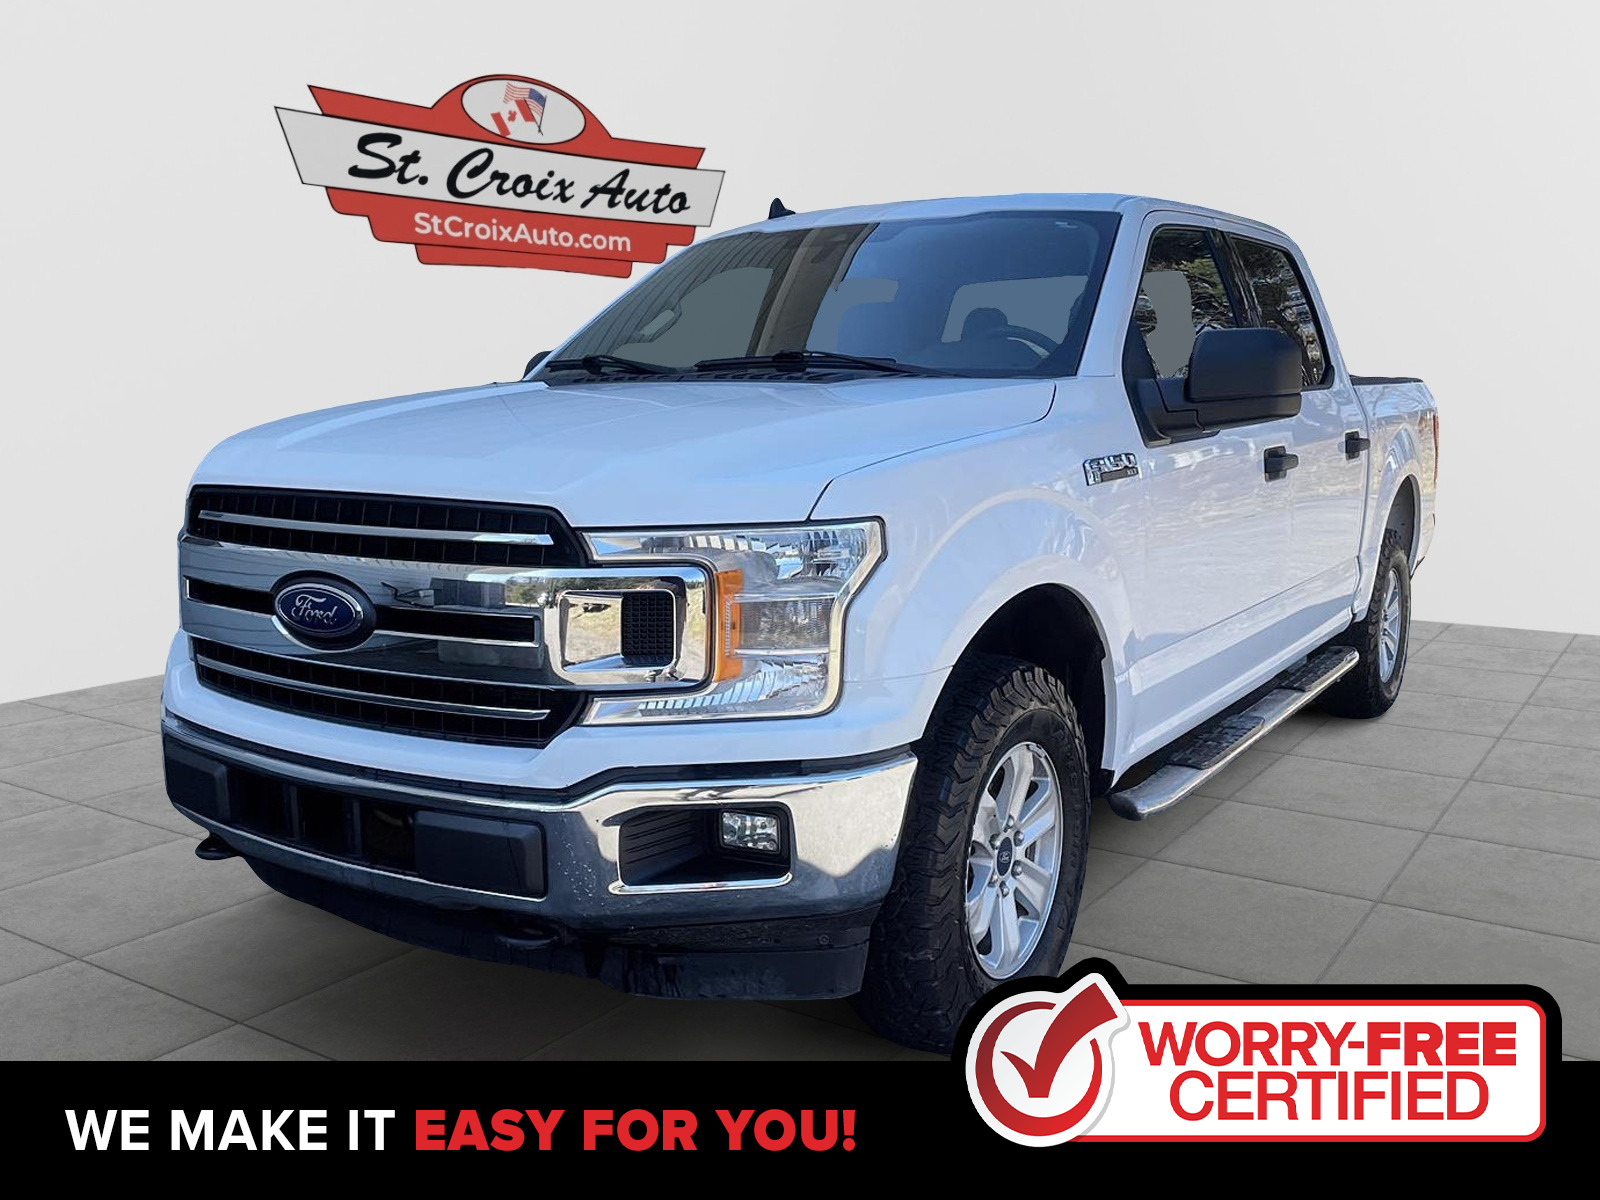 2020 Ford F-150 4X4 | 5.0L V8 | Crew Cab | Air Conditioning